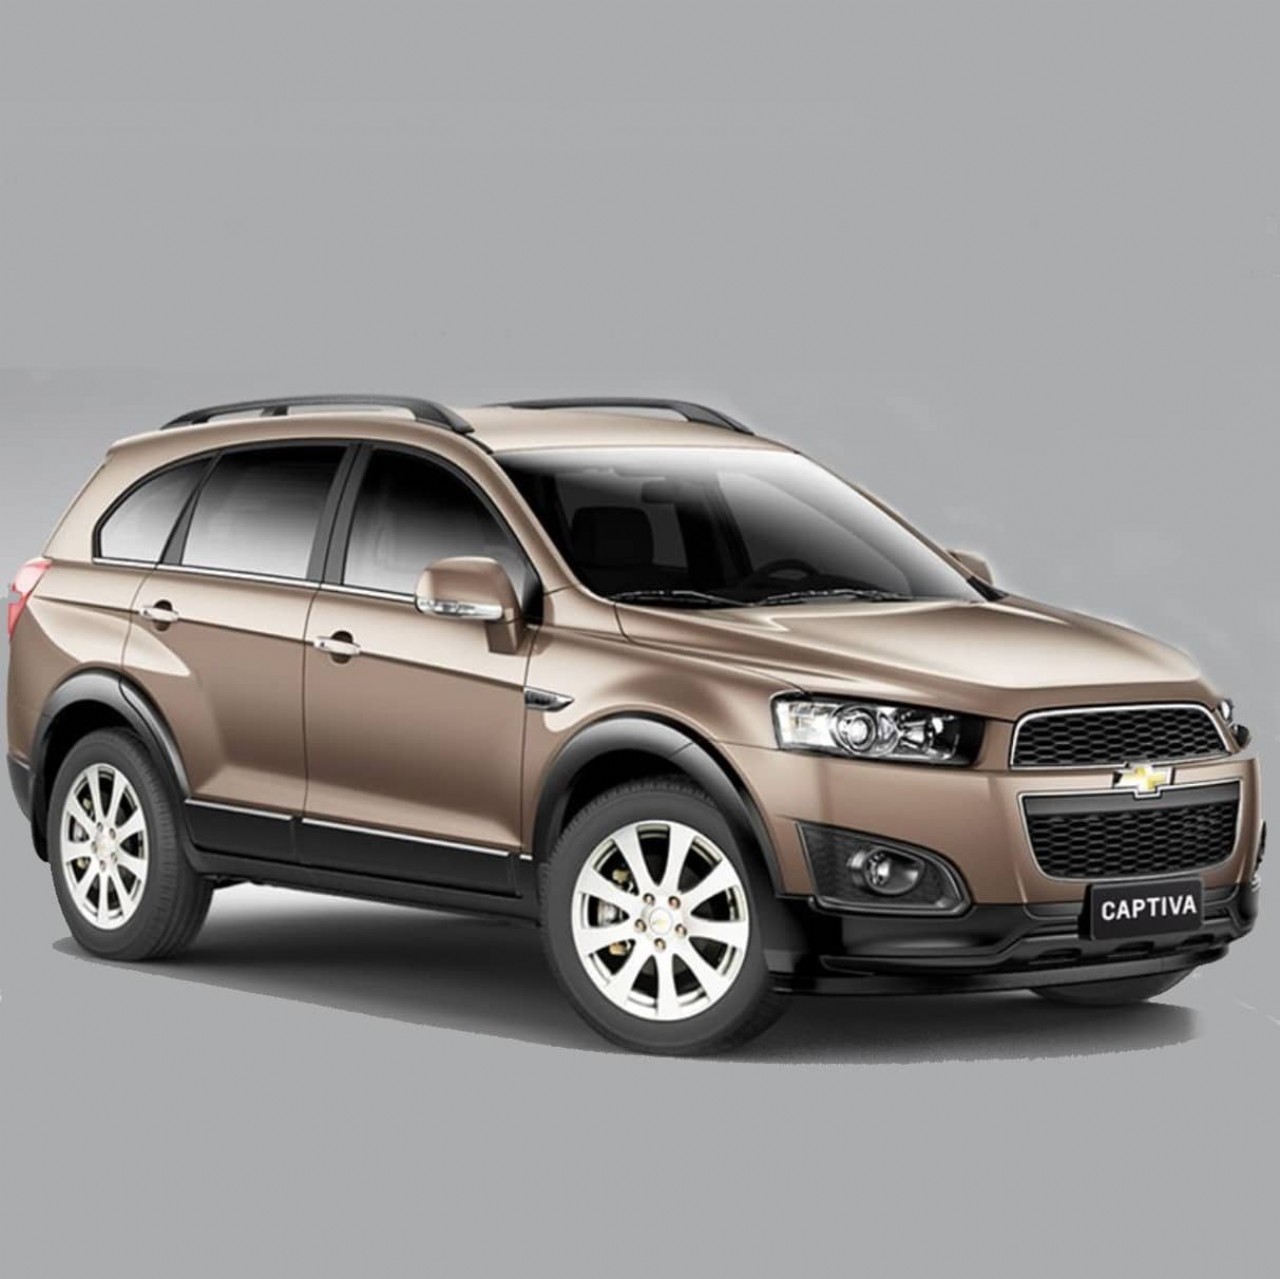 The oil capacity and type for the Chevrolet Captiva